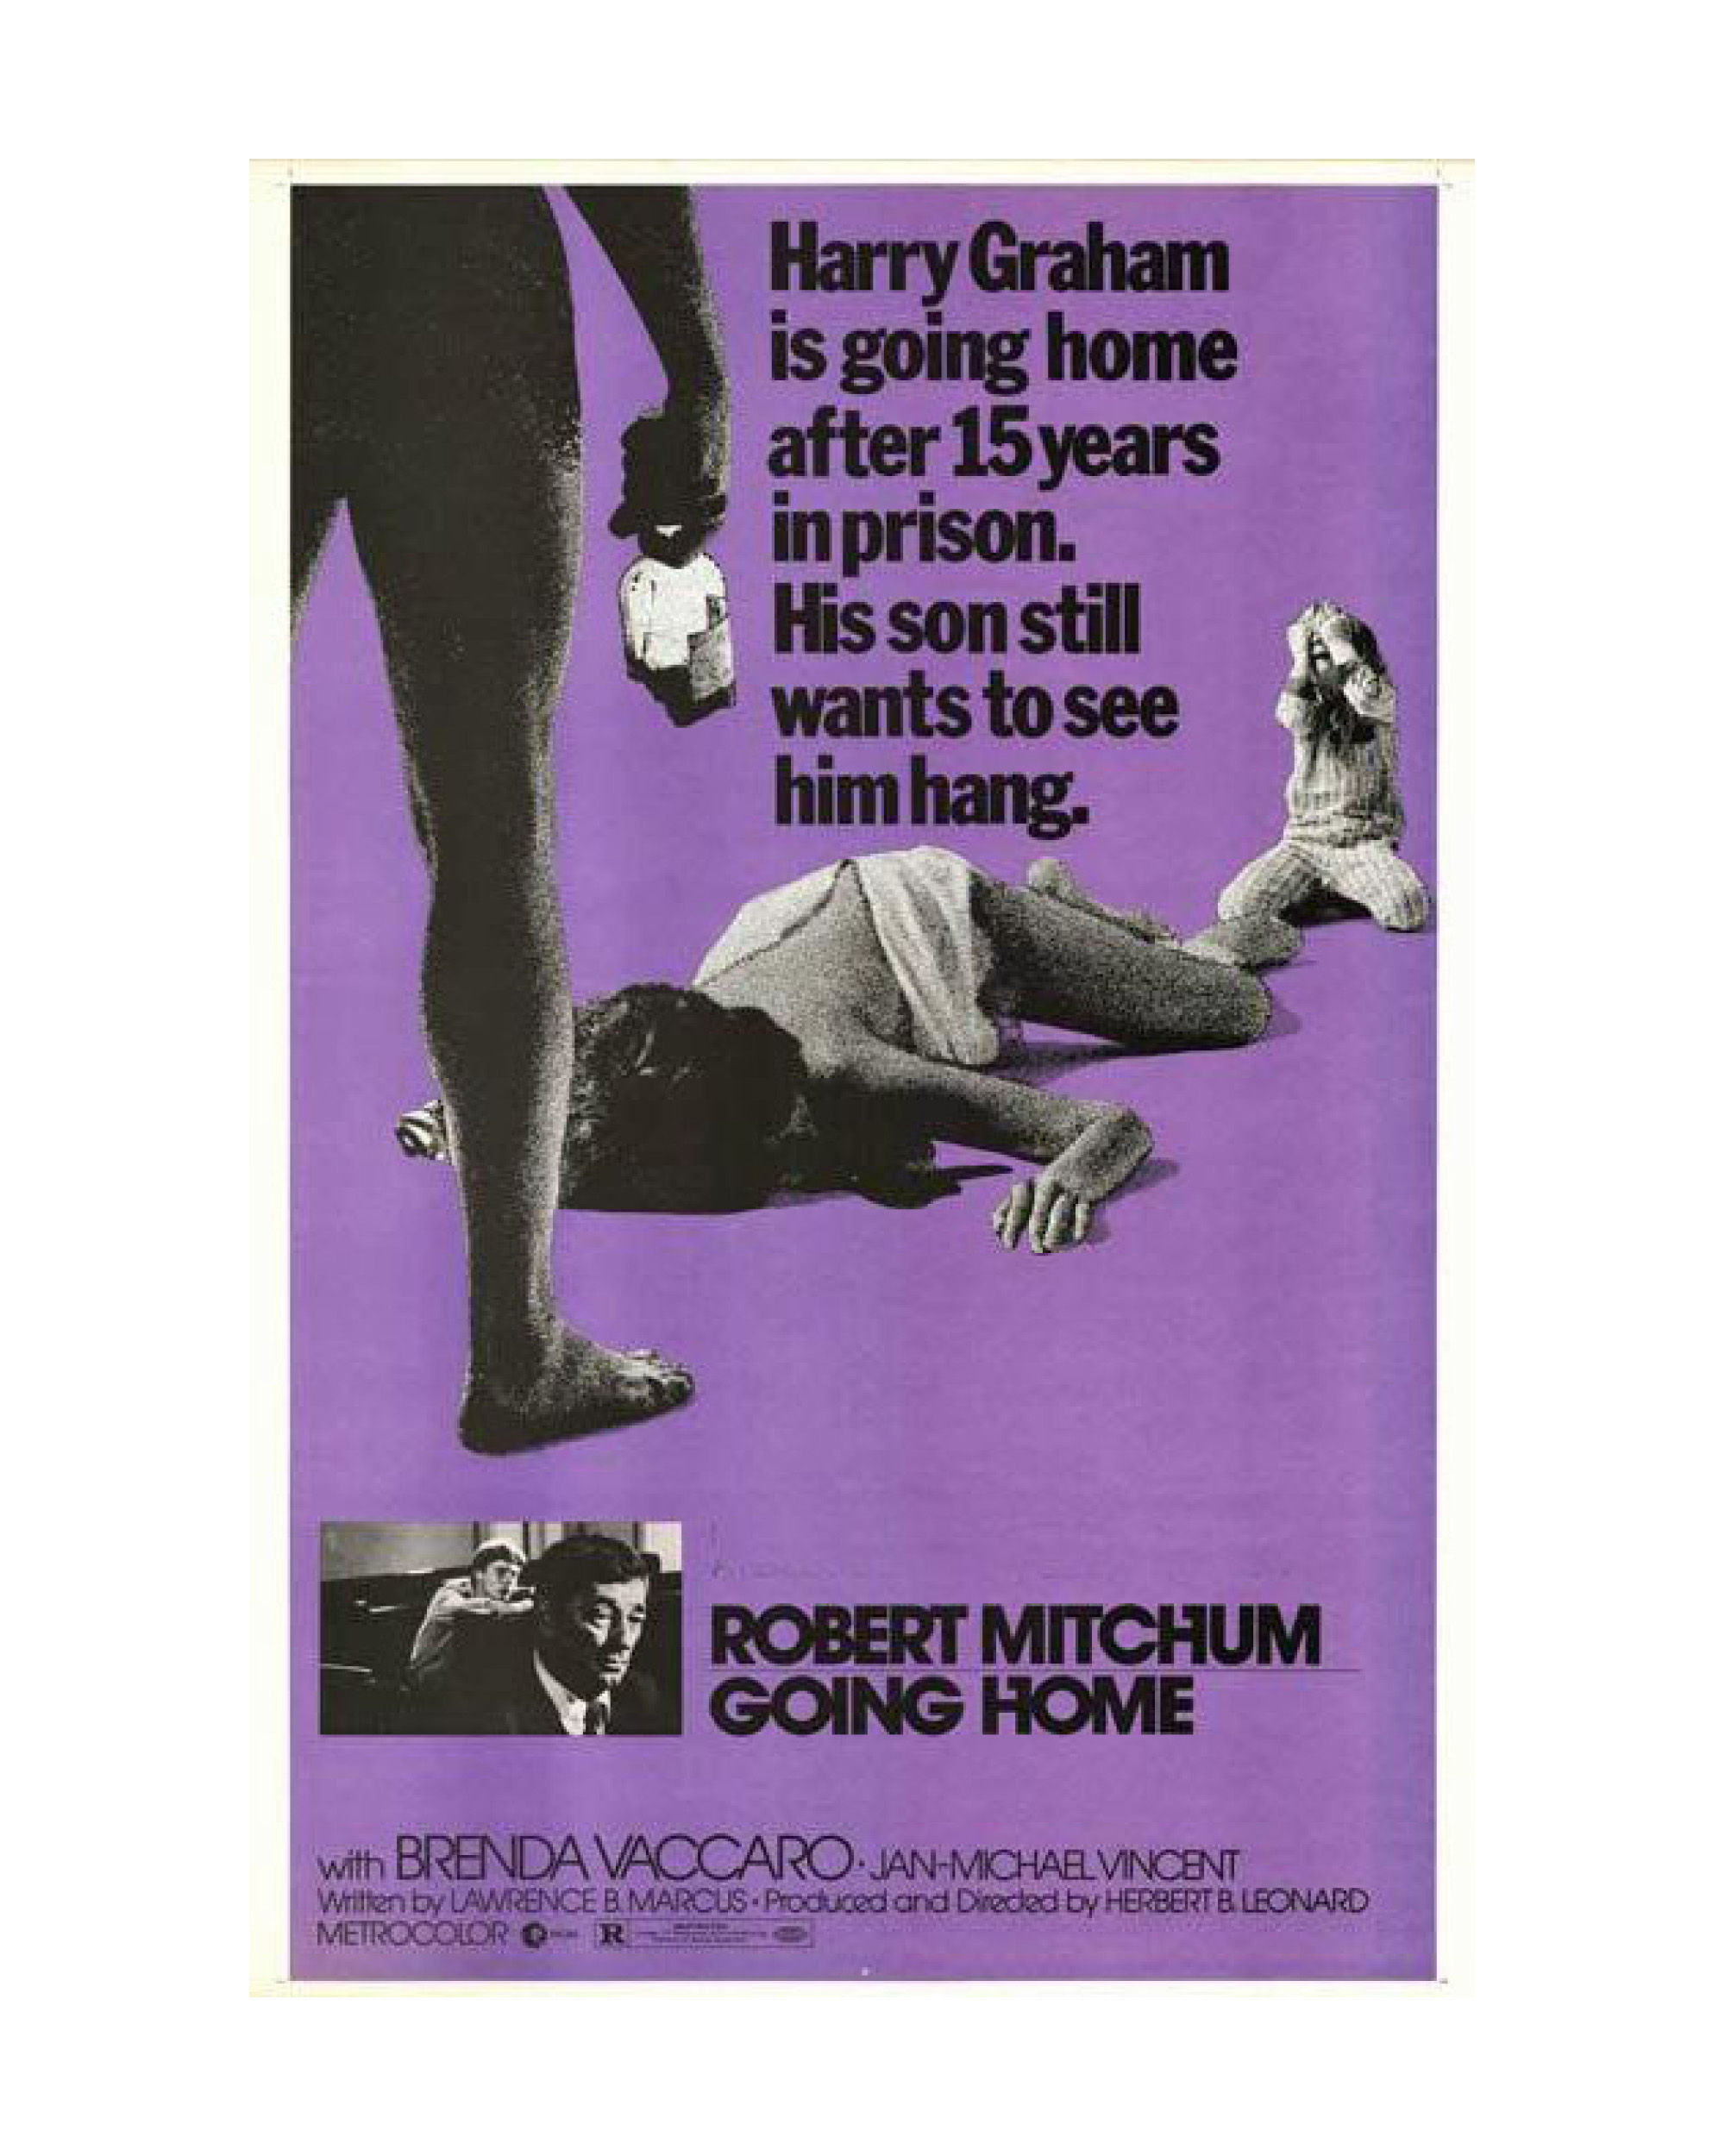 “I played a dead girl in a Robert Mitchum movie poster.” – Lois Gibson